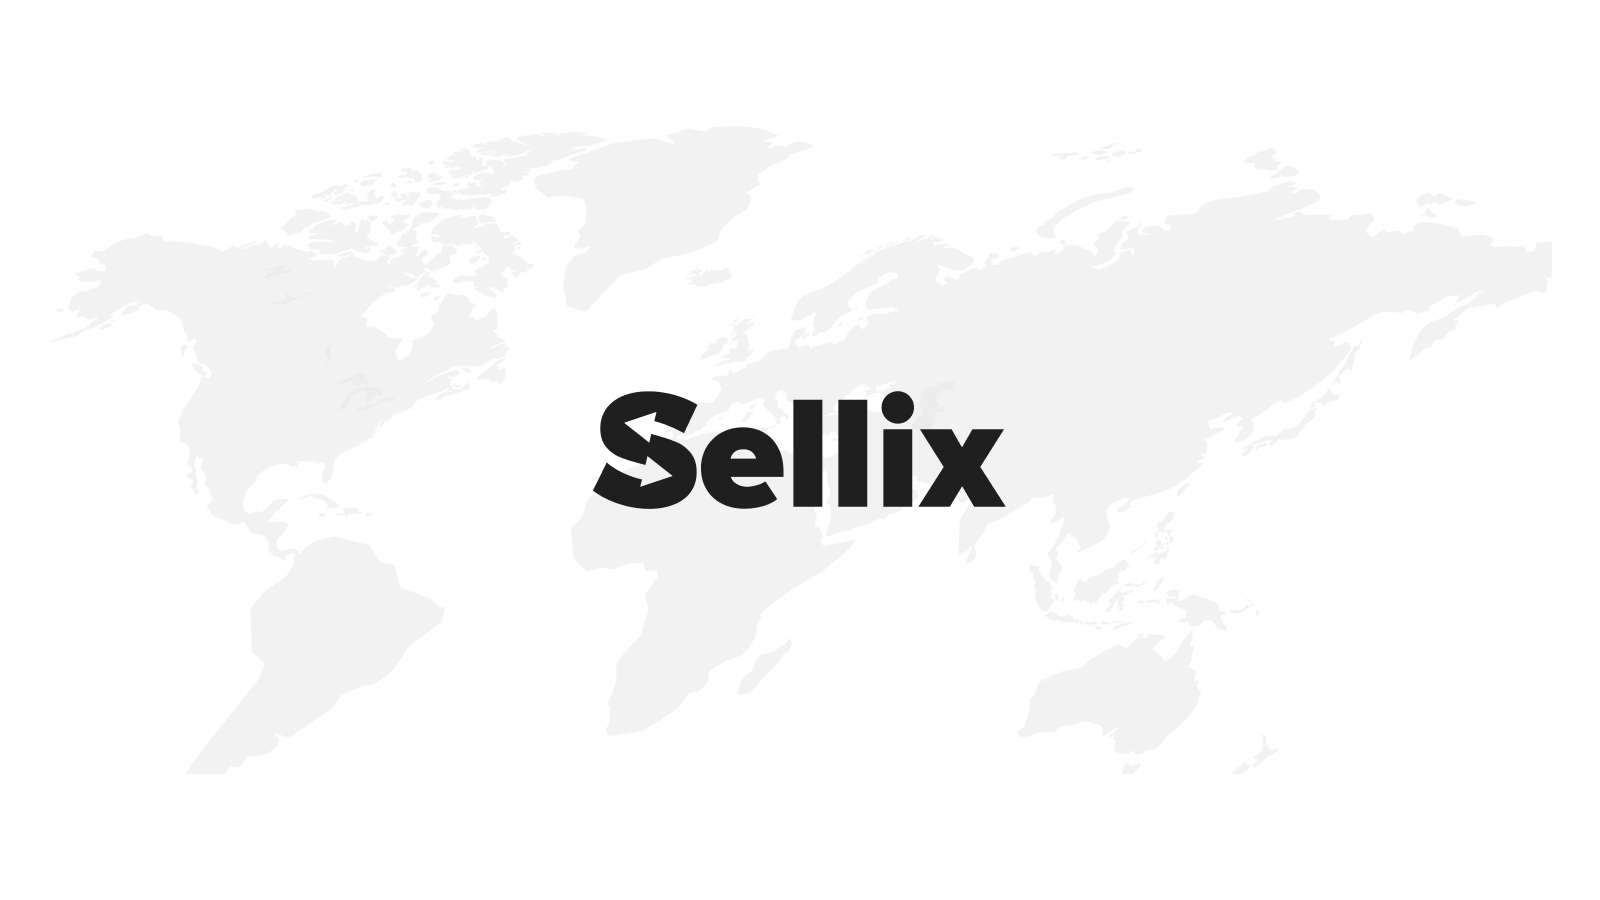 Customer Support Reimagined at Sellix